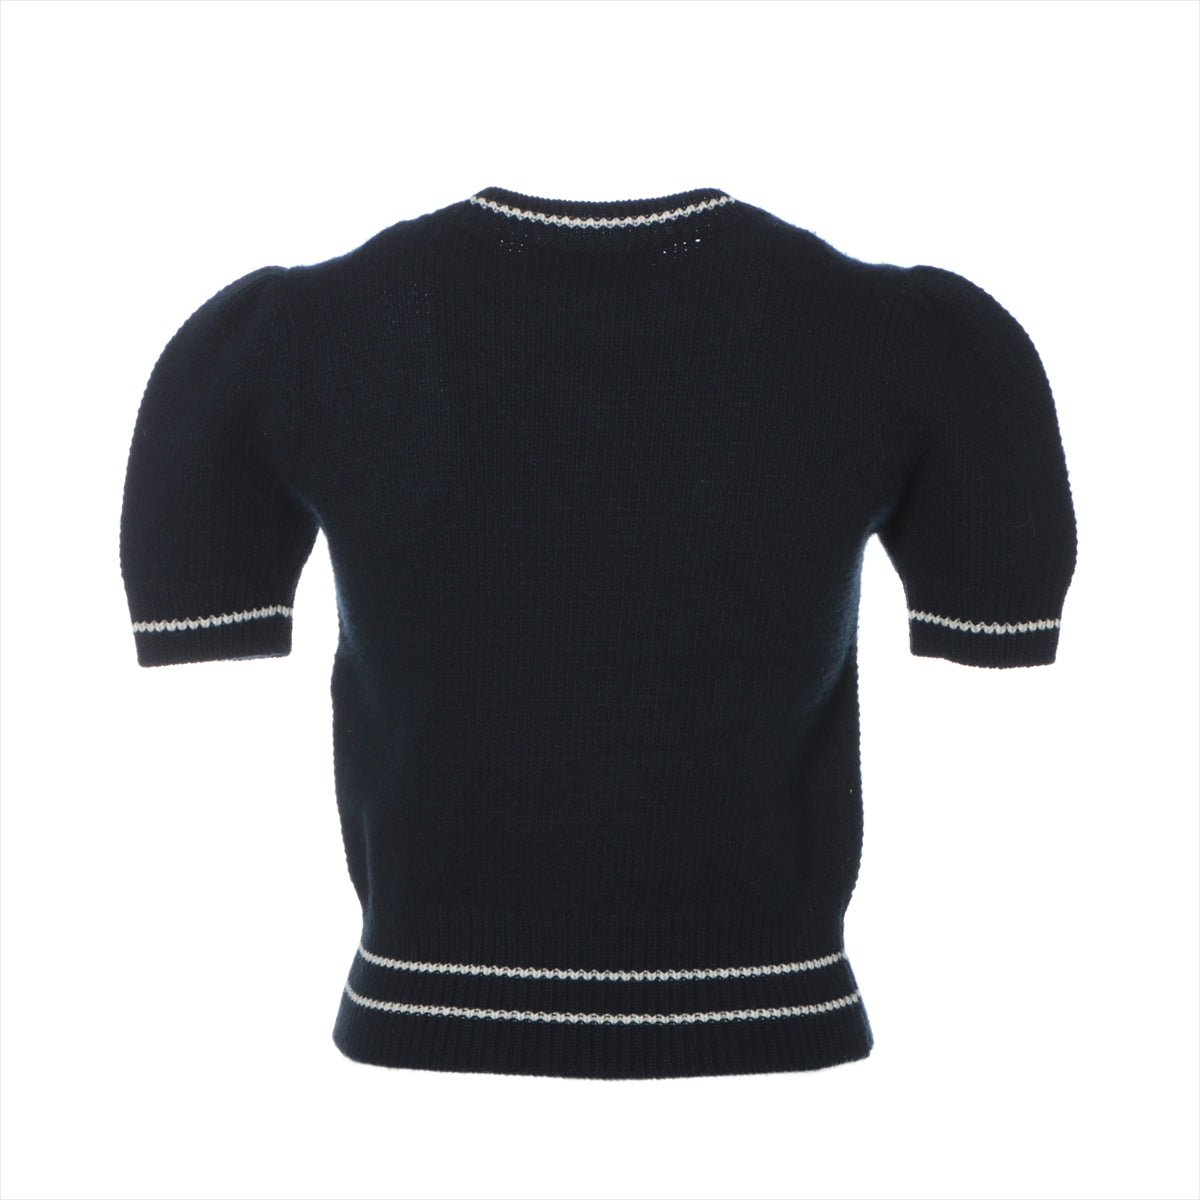 Christian Dior Wool & Cashmere Short Sleeve Knitwear I38 Ladies' Navy blue  224S09AM308